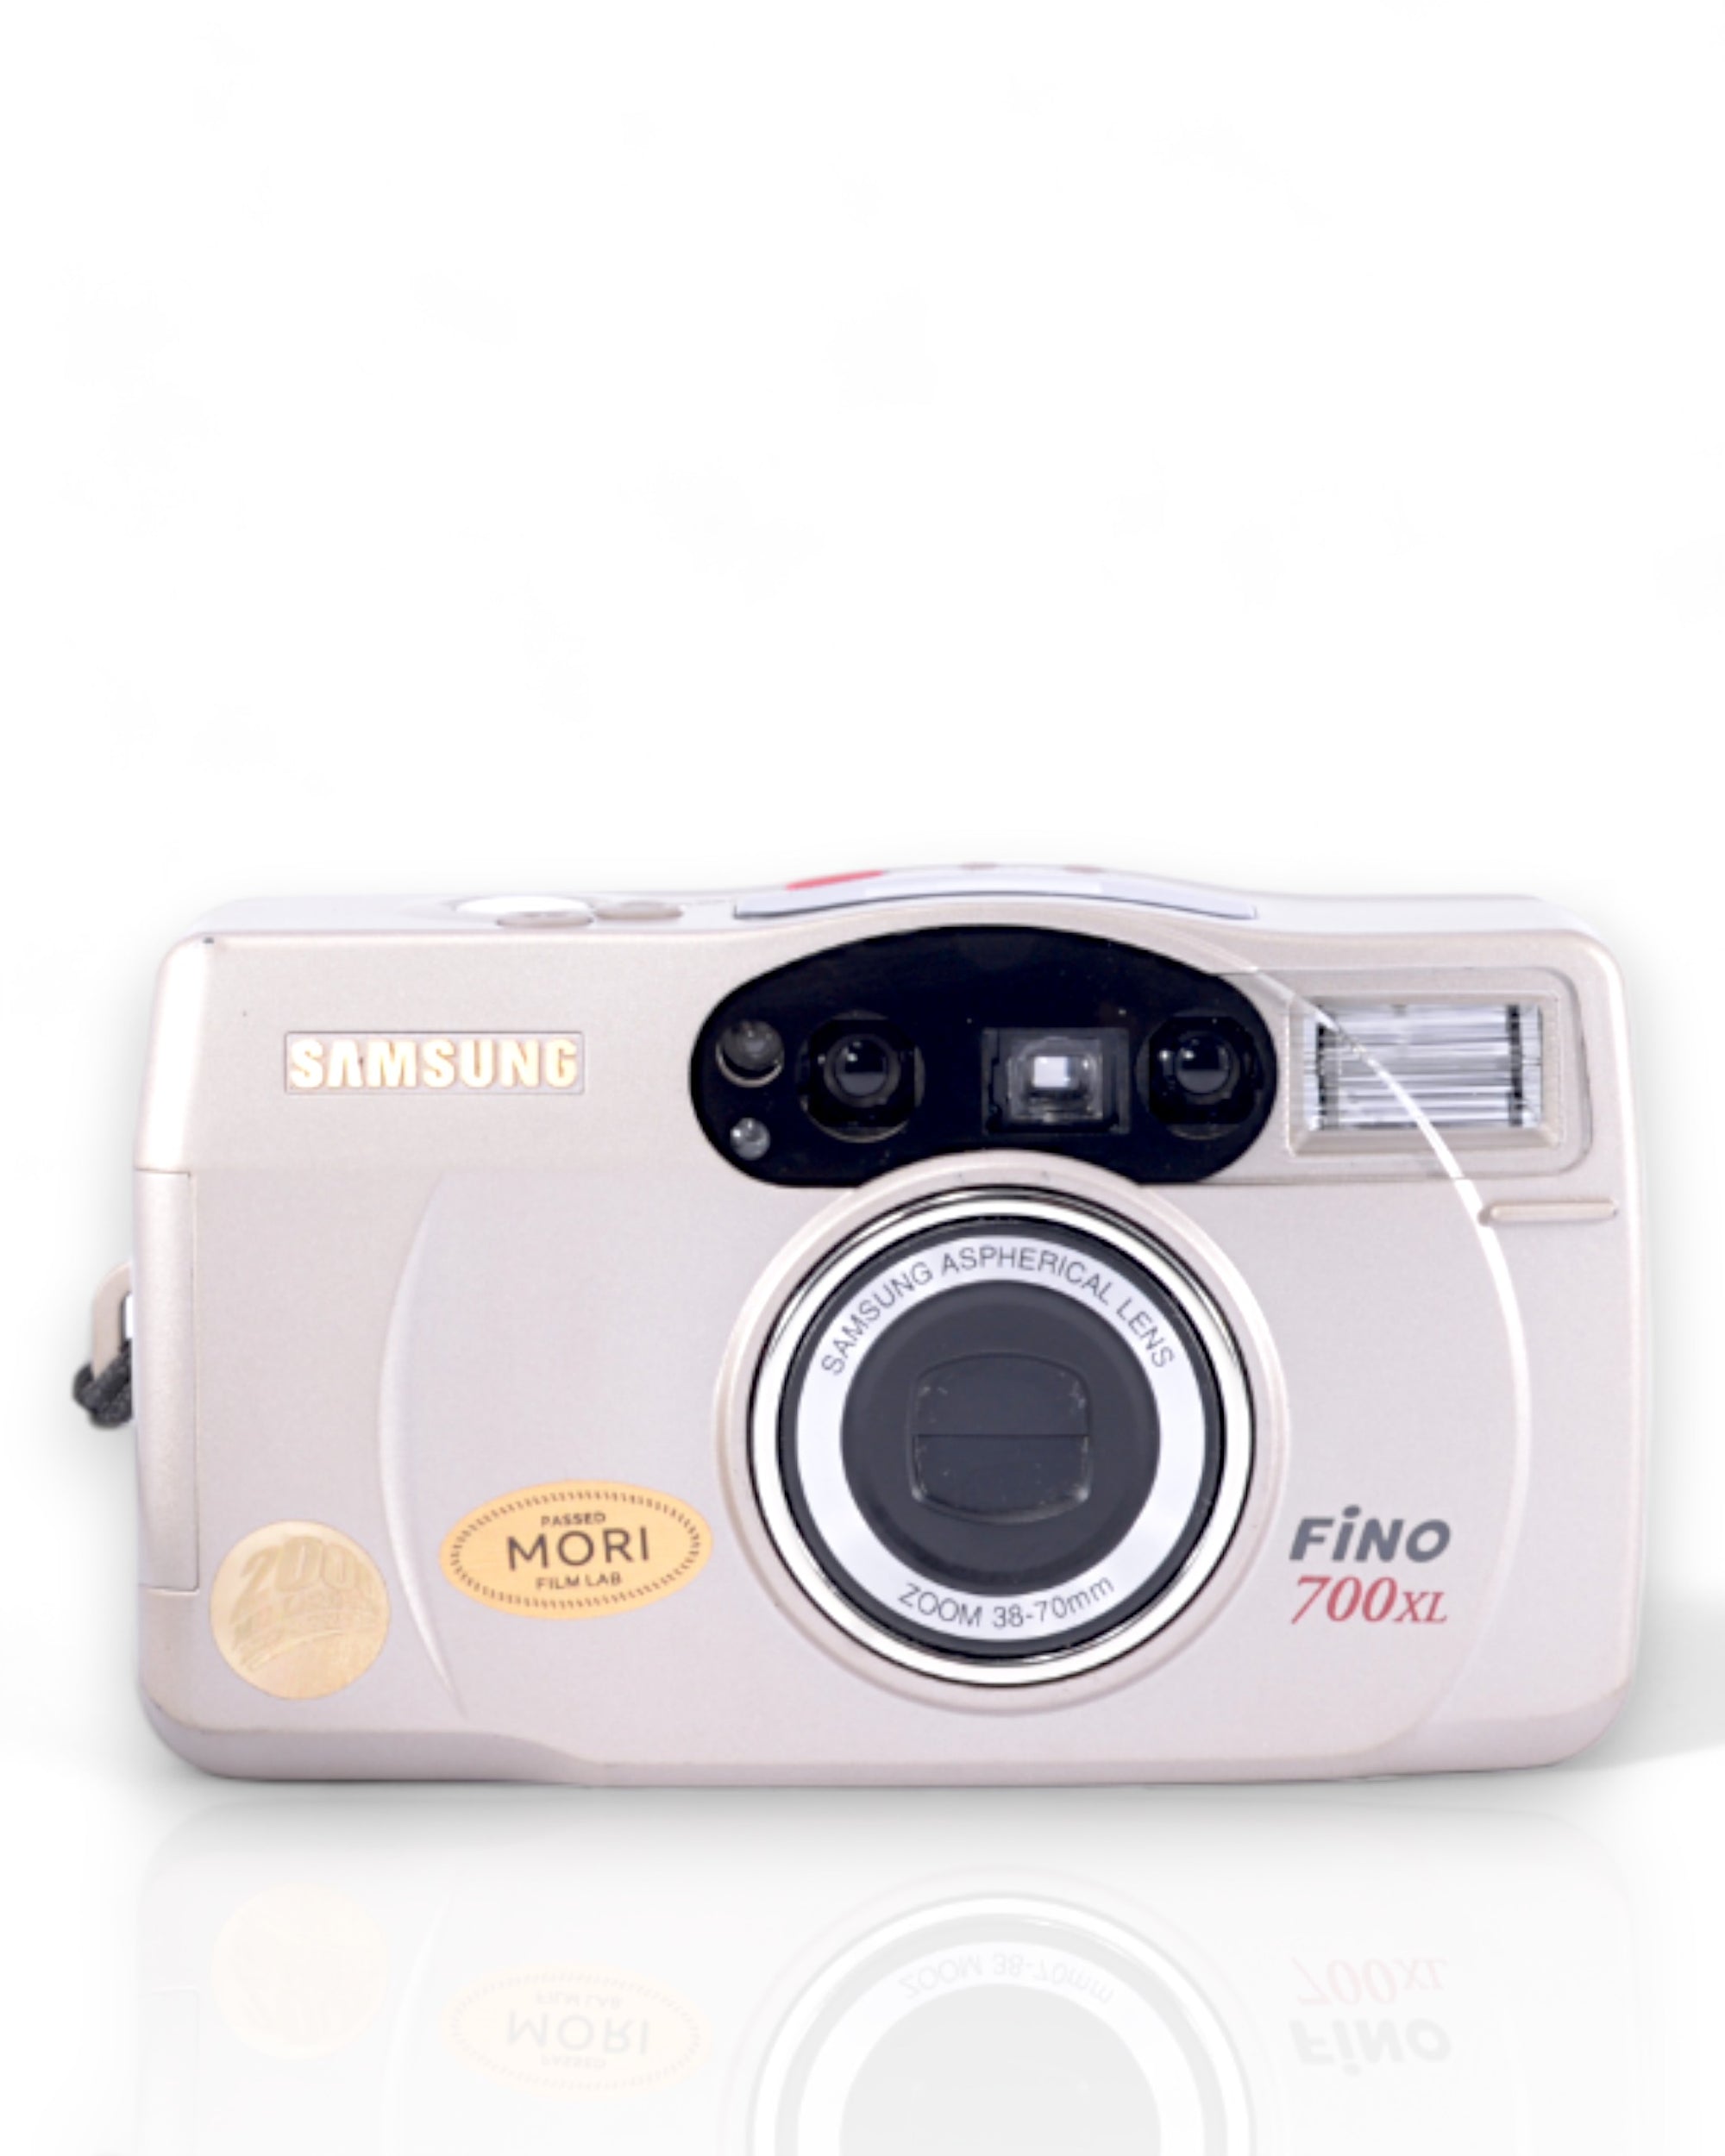 Samsung Fino 700 XL 35mm Point & Shoot film camera with 38-70mm zoom lens